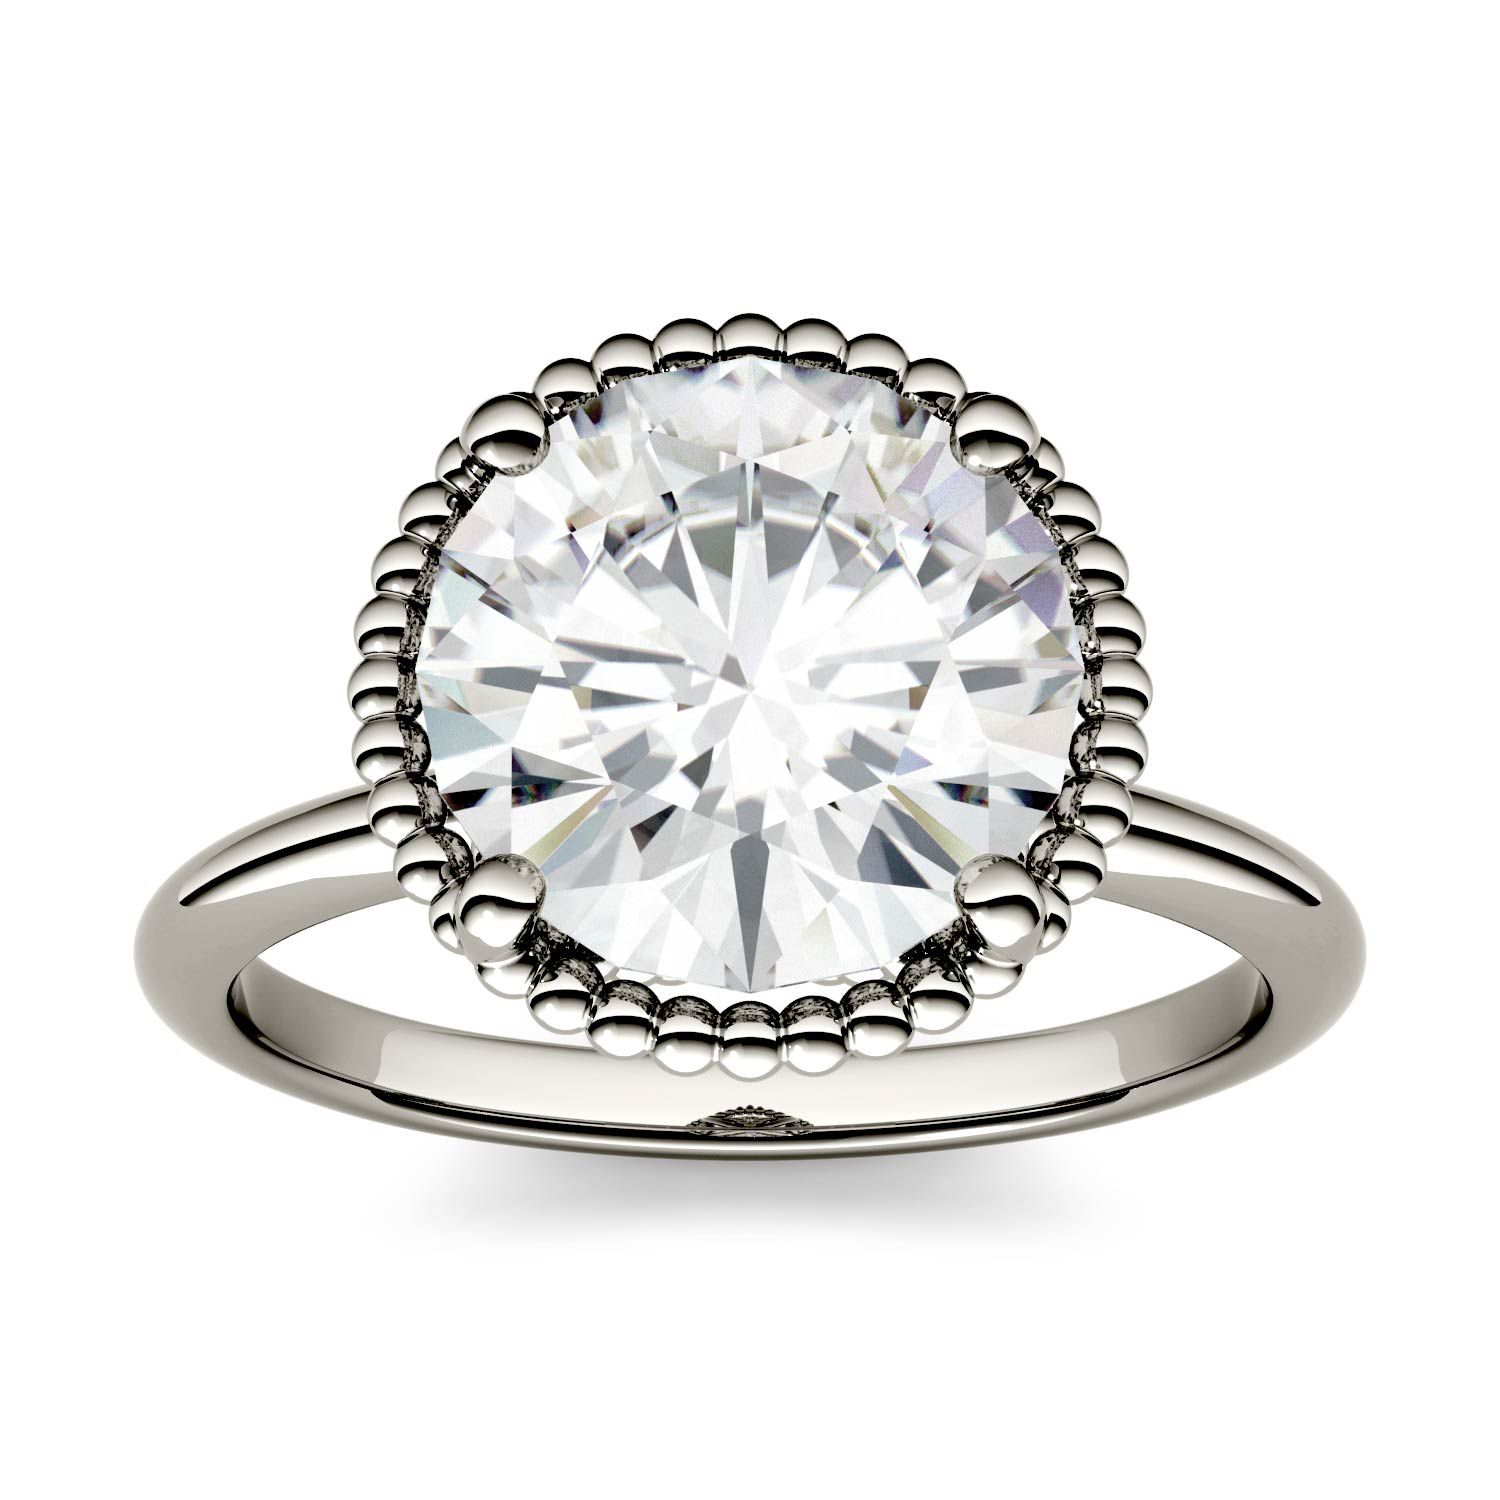 CHARLES & COLVARD: DEW Moissainte Beaded Solitaire Engagement Ring